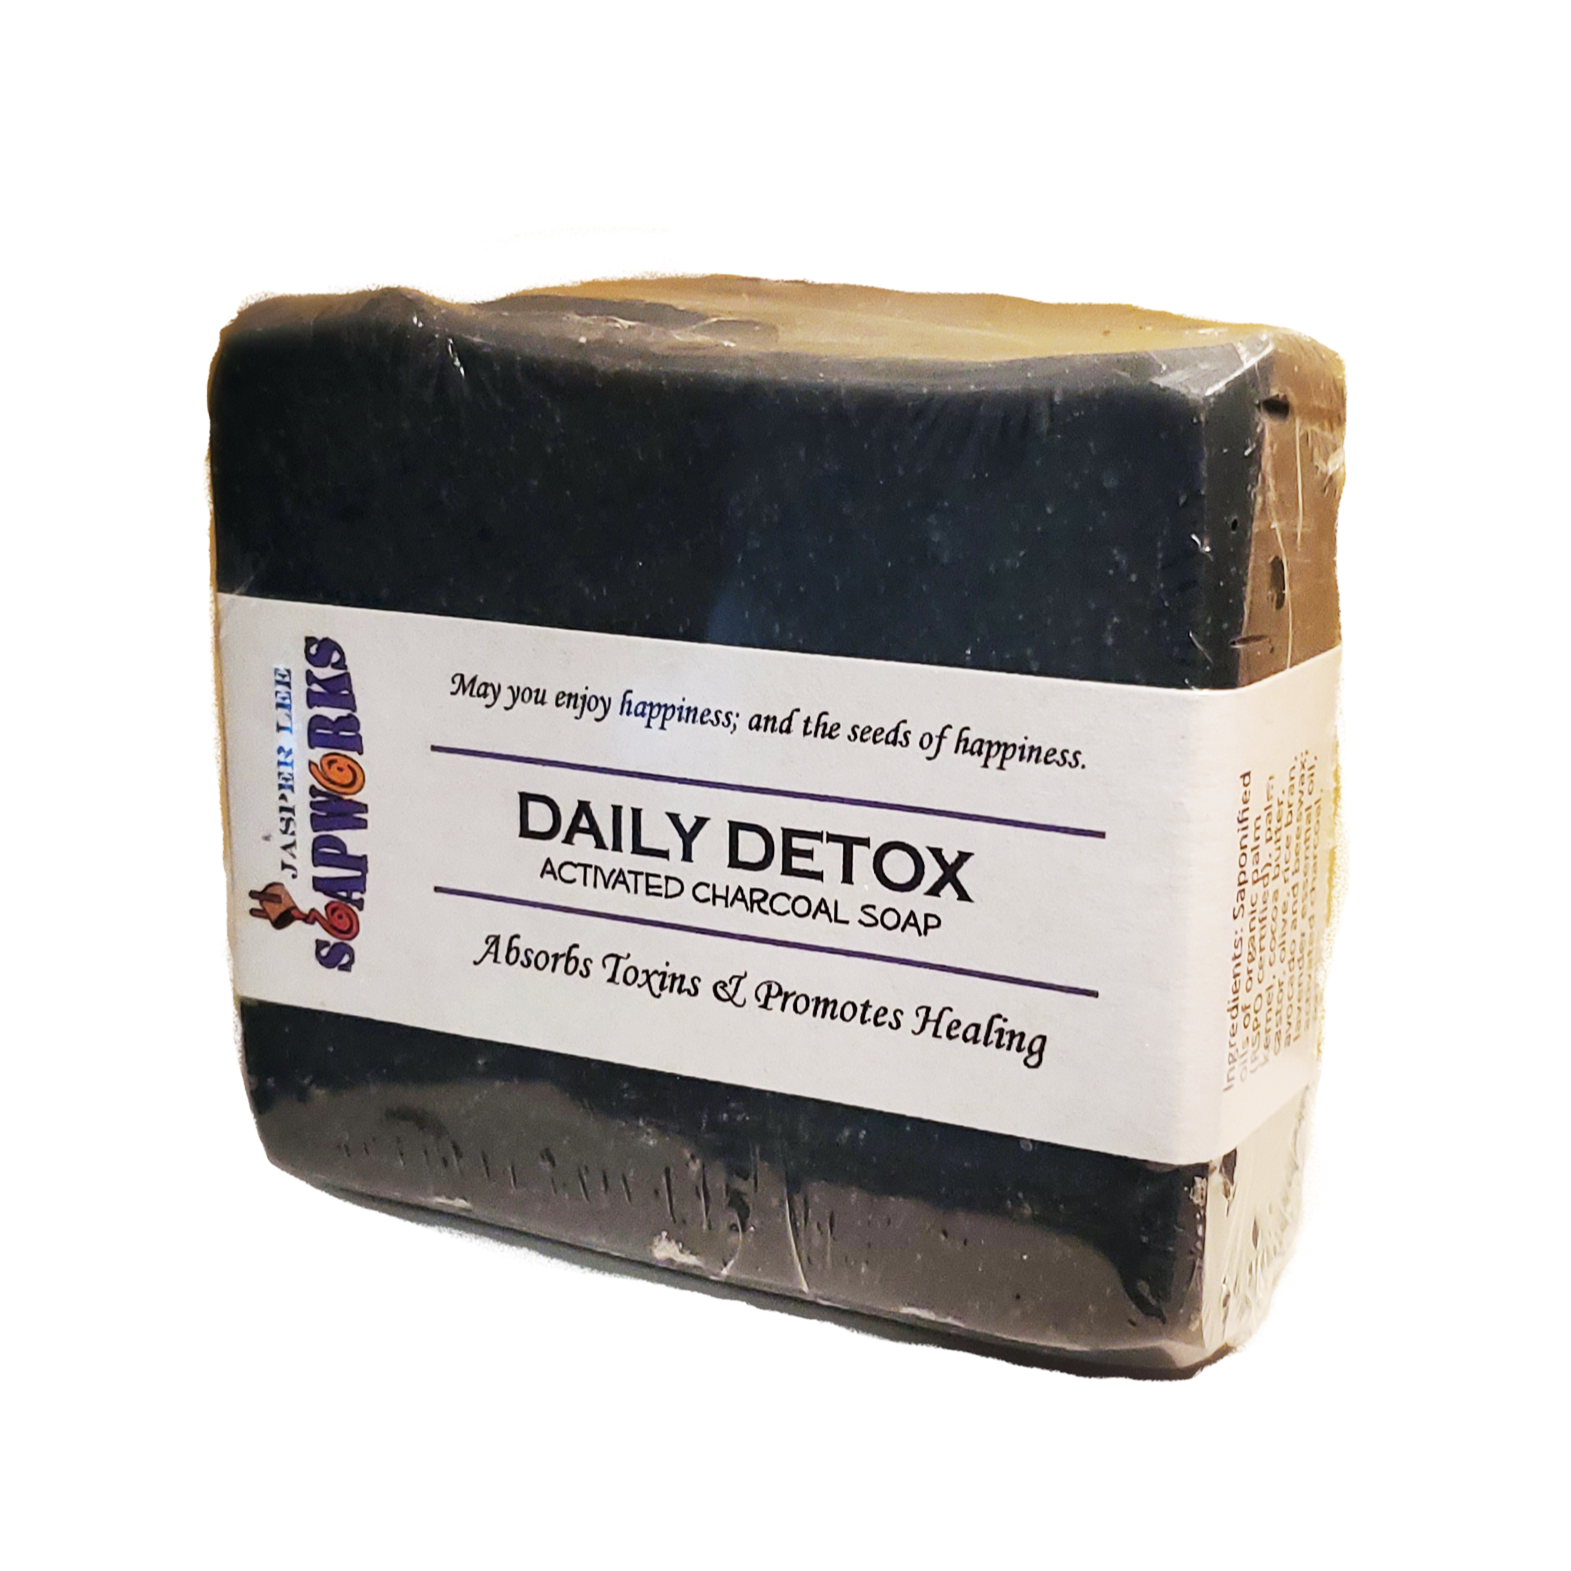 Daily Detox activated Charcoal soap bar in biodegradable clear wrap